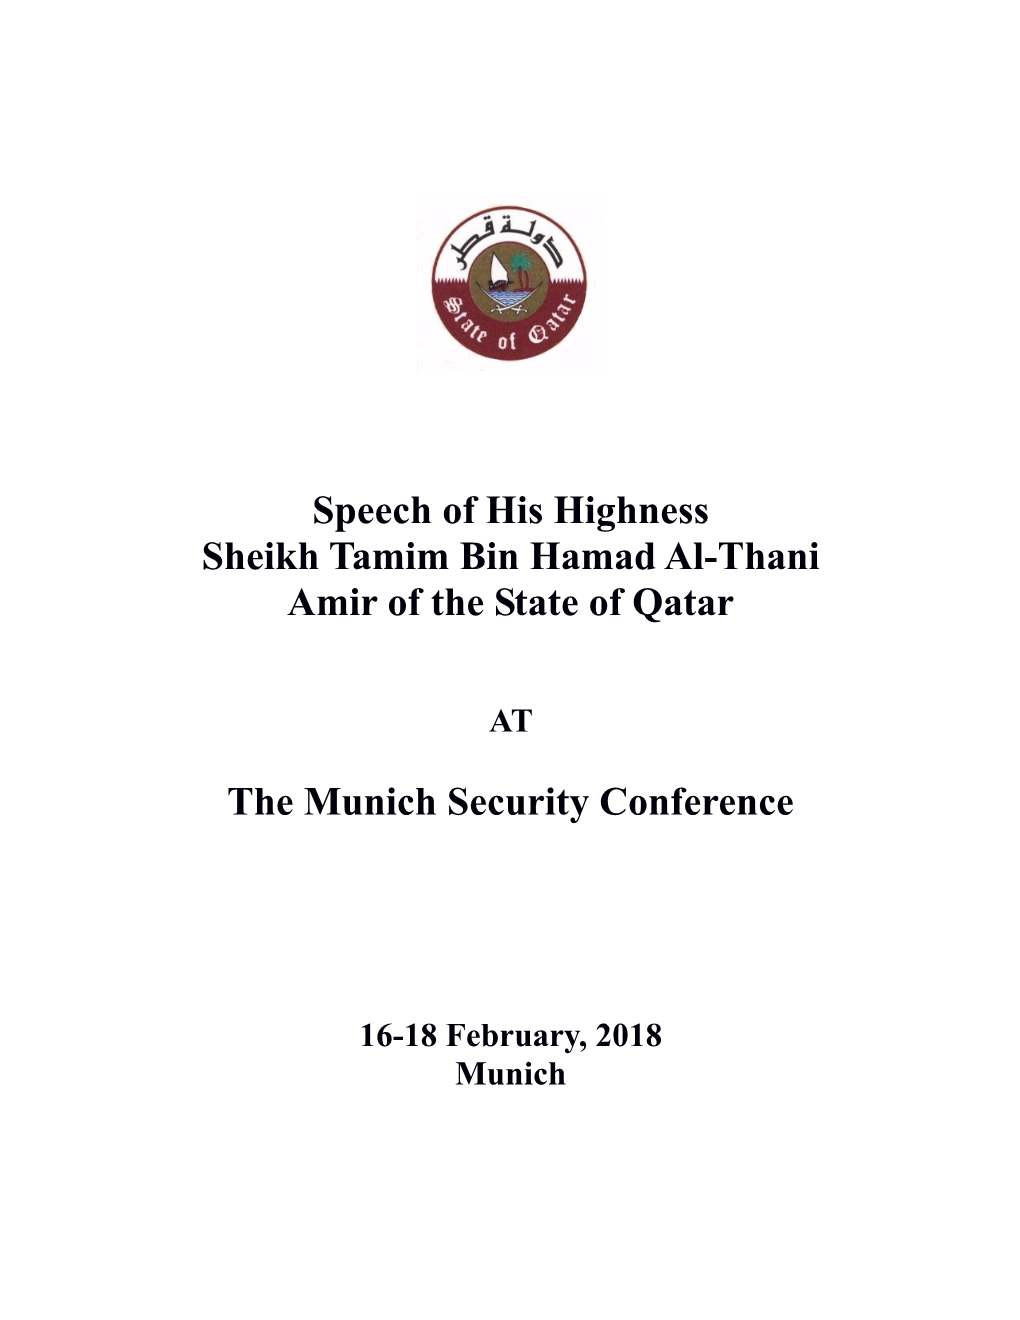 Speech of His Highness Sheikh Tamim Bin Hamad Al-Thani Amir of the State of Qatar the Munich Security Conference